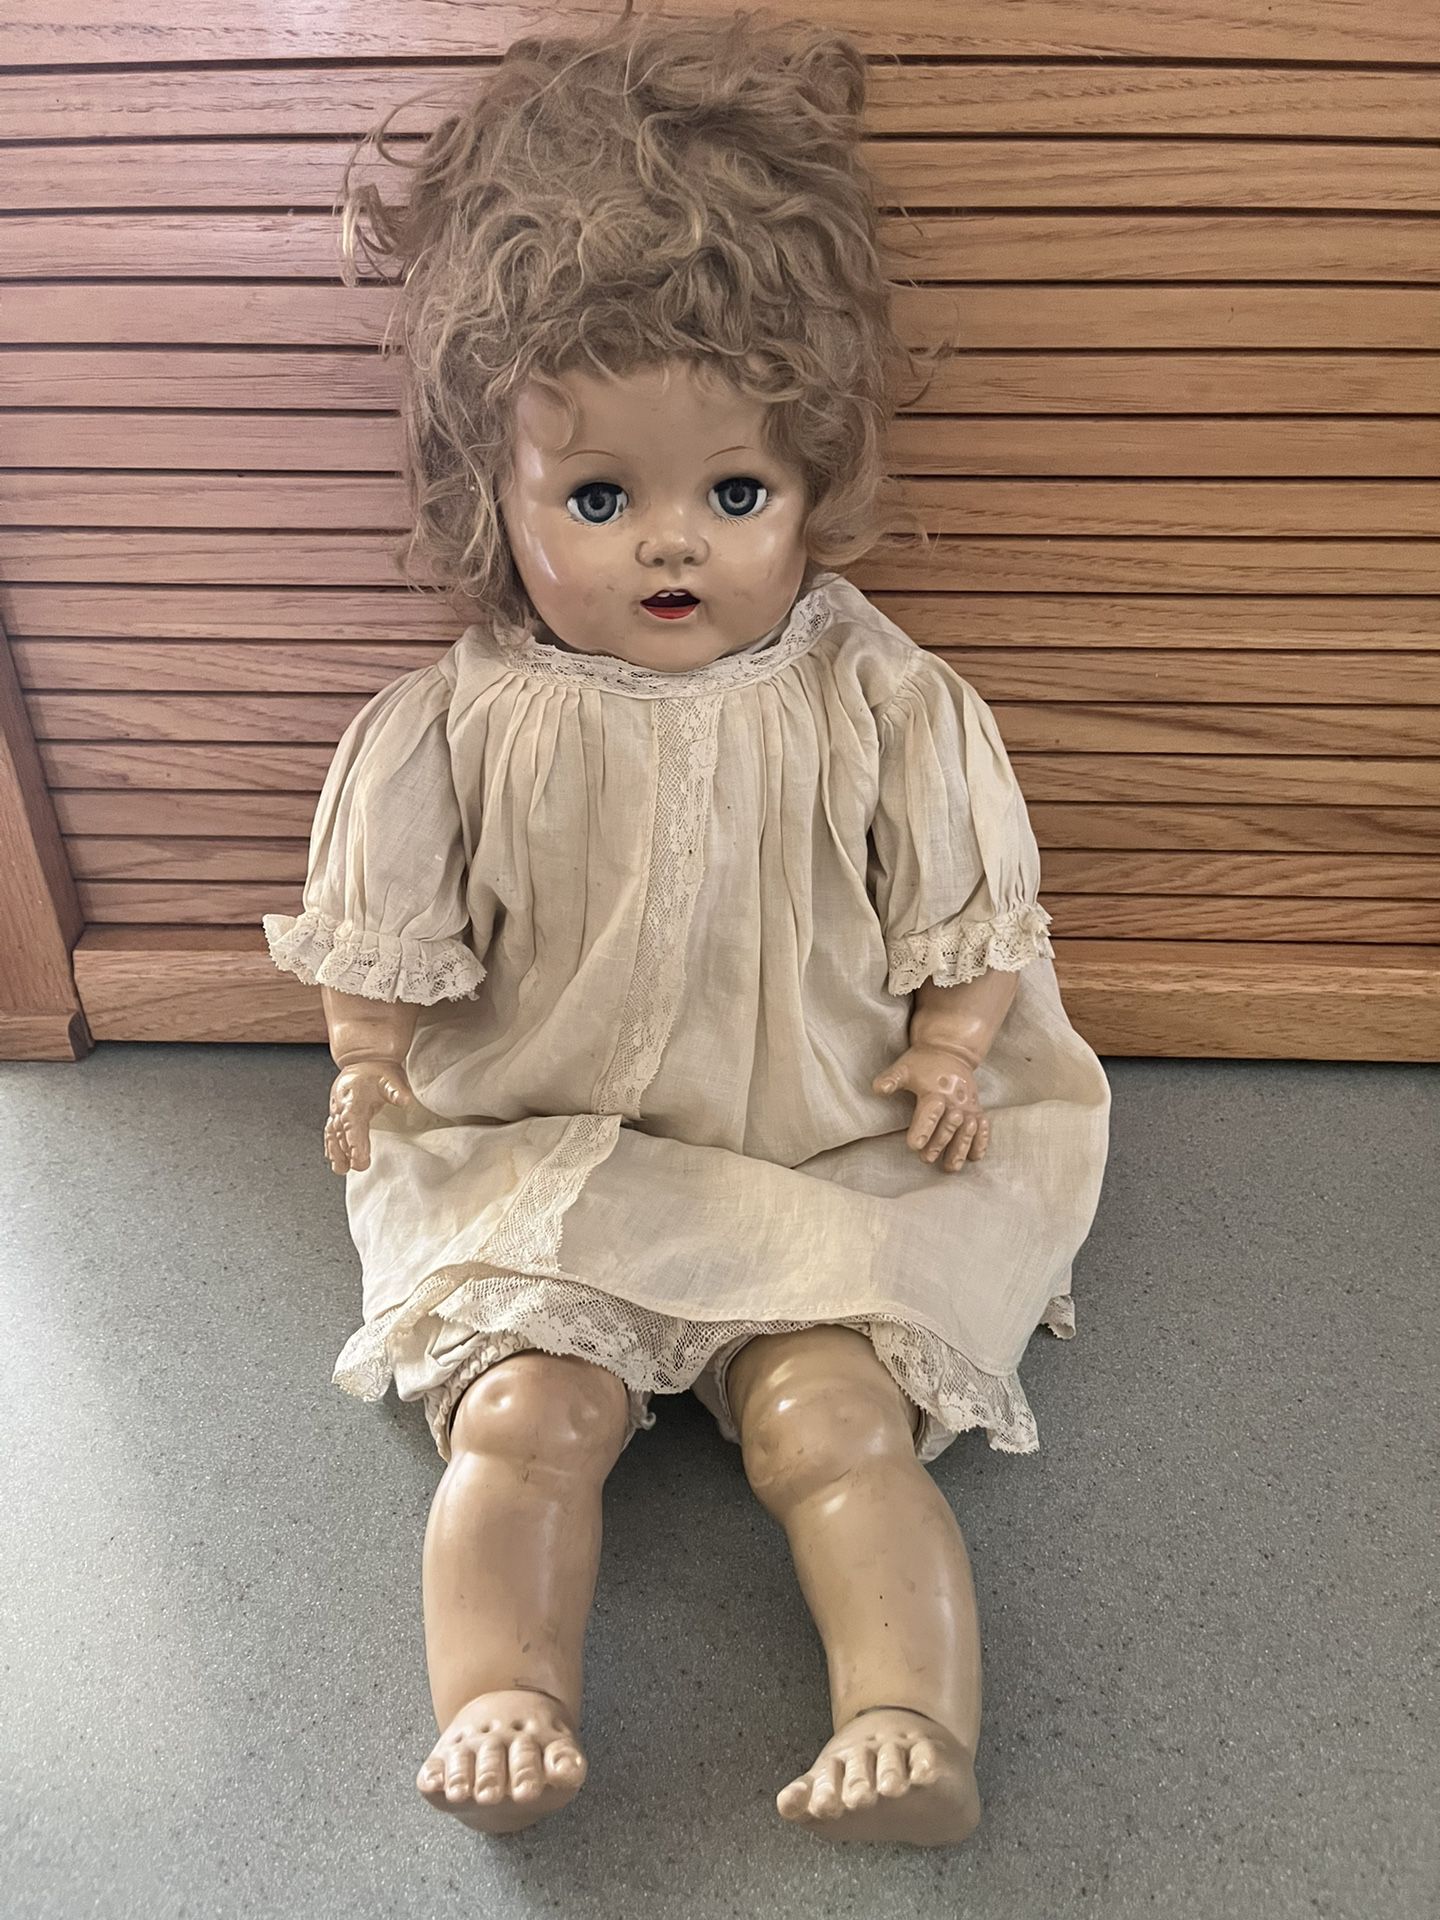 Antique P 200 Ideal baby doll-22”. Cry box still works. Original clothes.